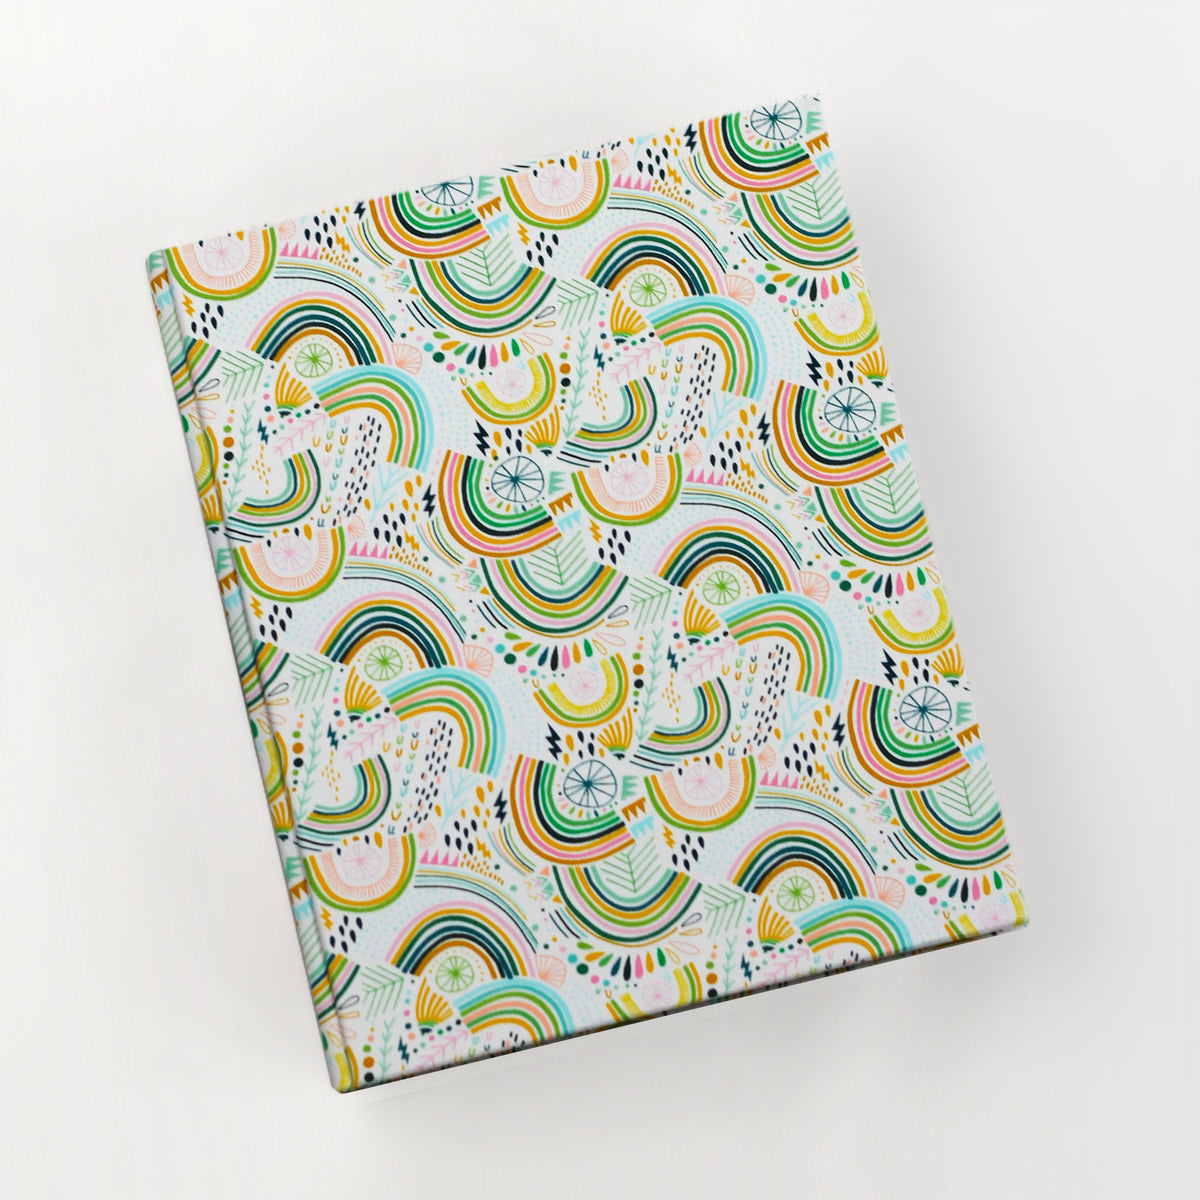 Large 8x10 Blank Page Journal | Cover: Rainbow